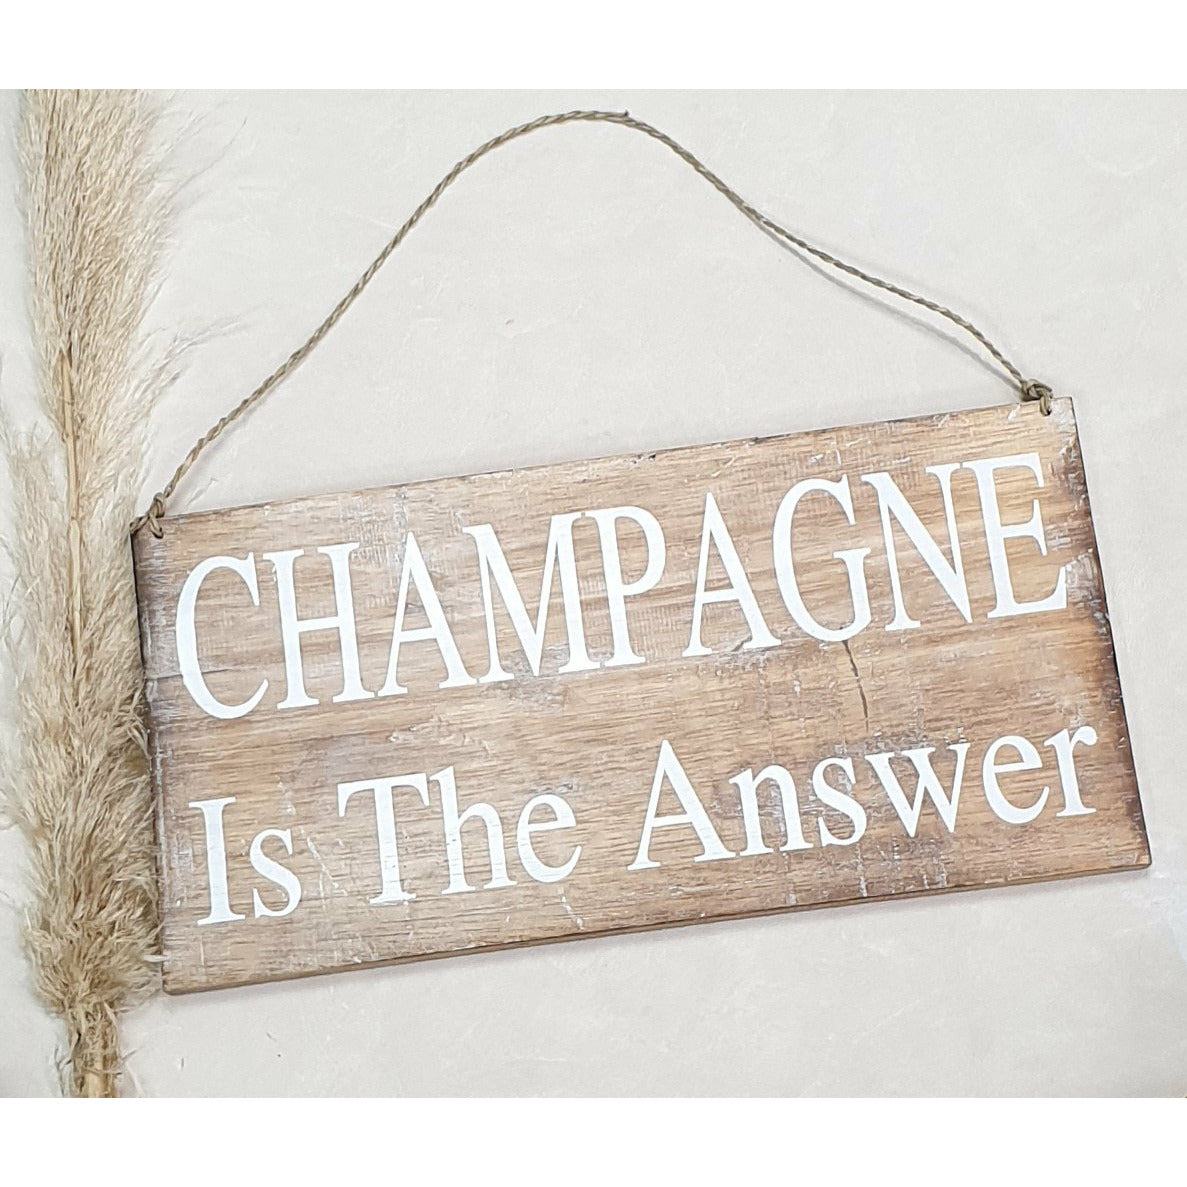 "Champagne is the answer" Wooden Sign Not specified